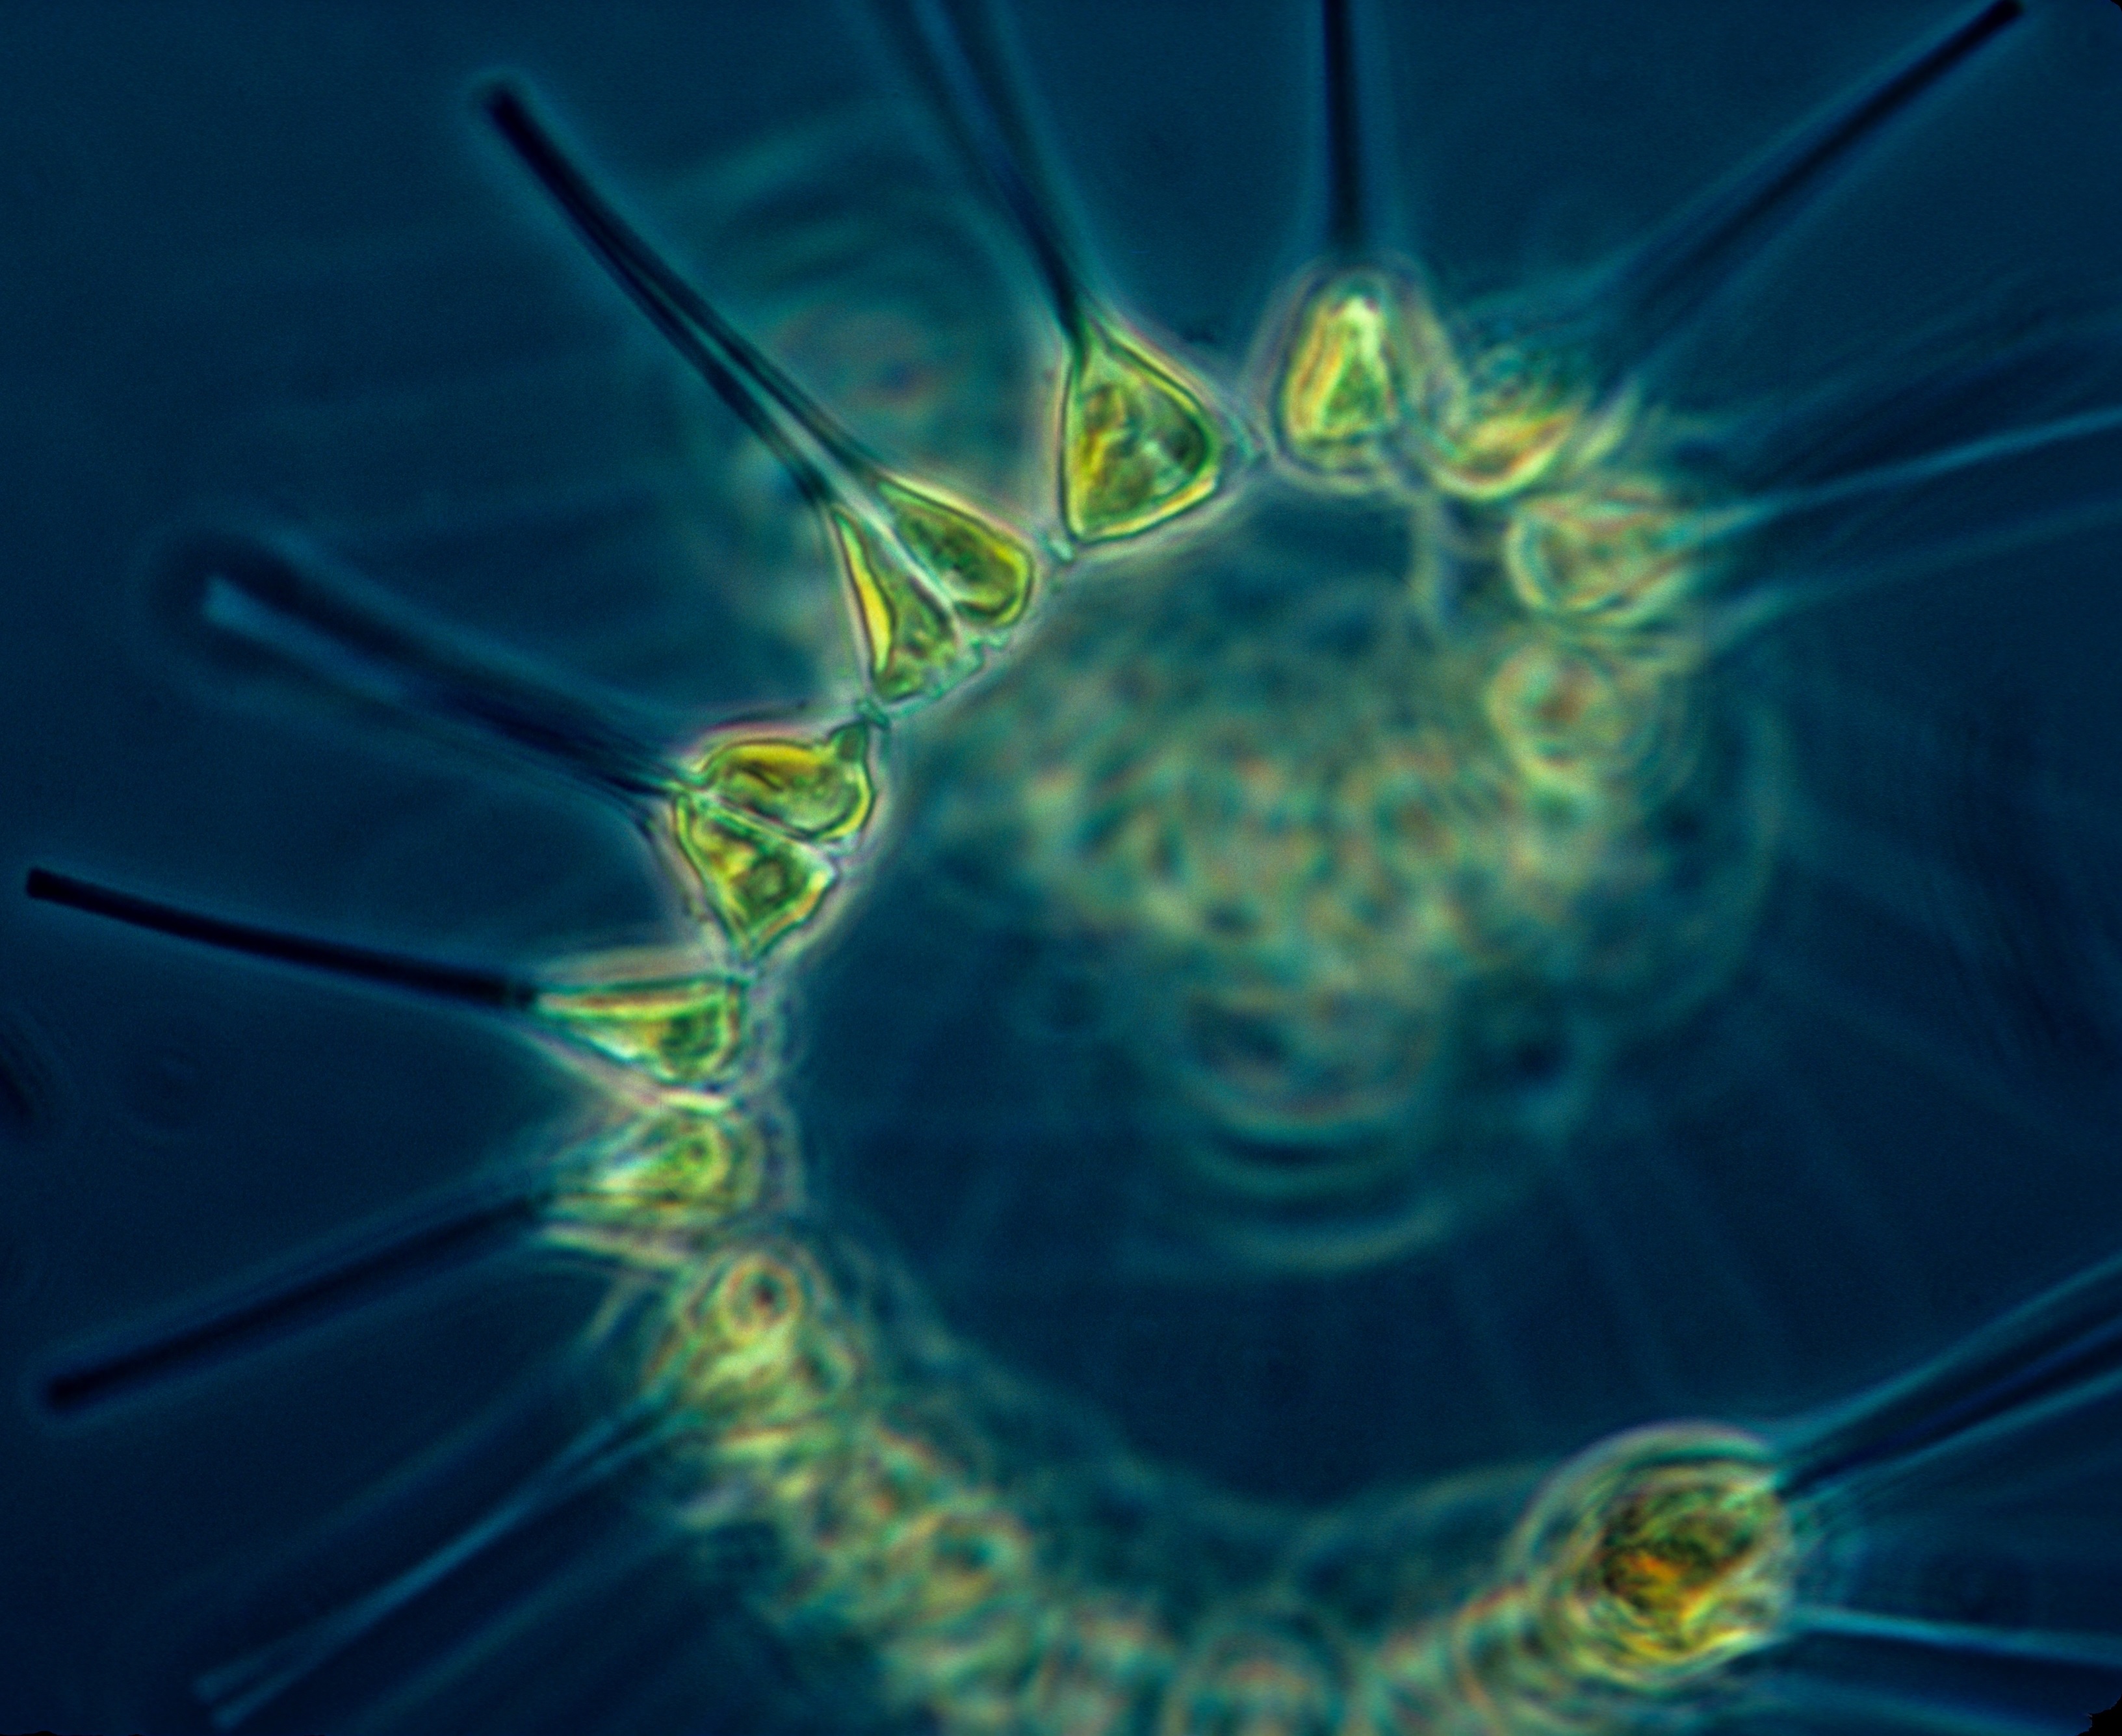 Monday Archives: Reef Tips: Let’s talk about Phytoplankton!